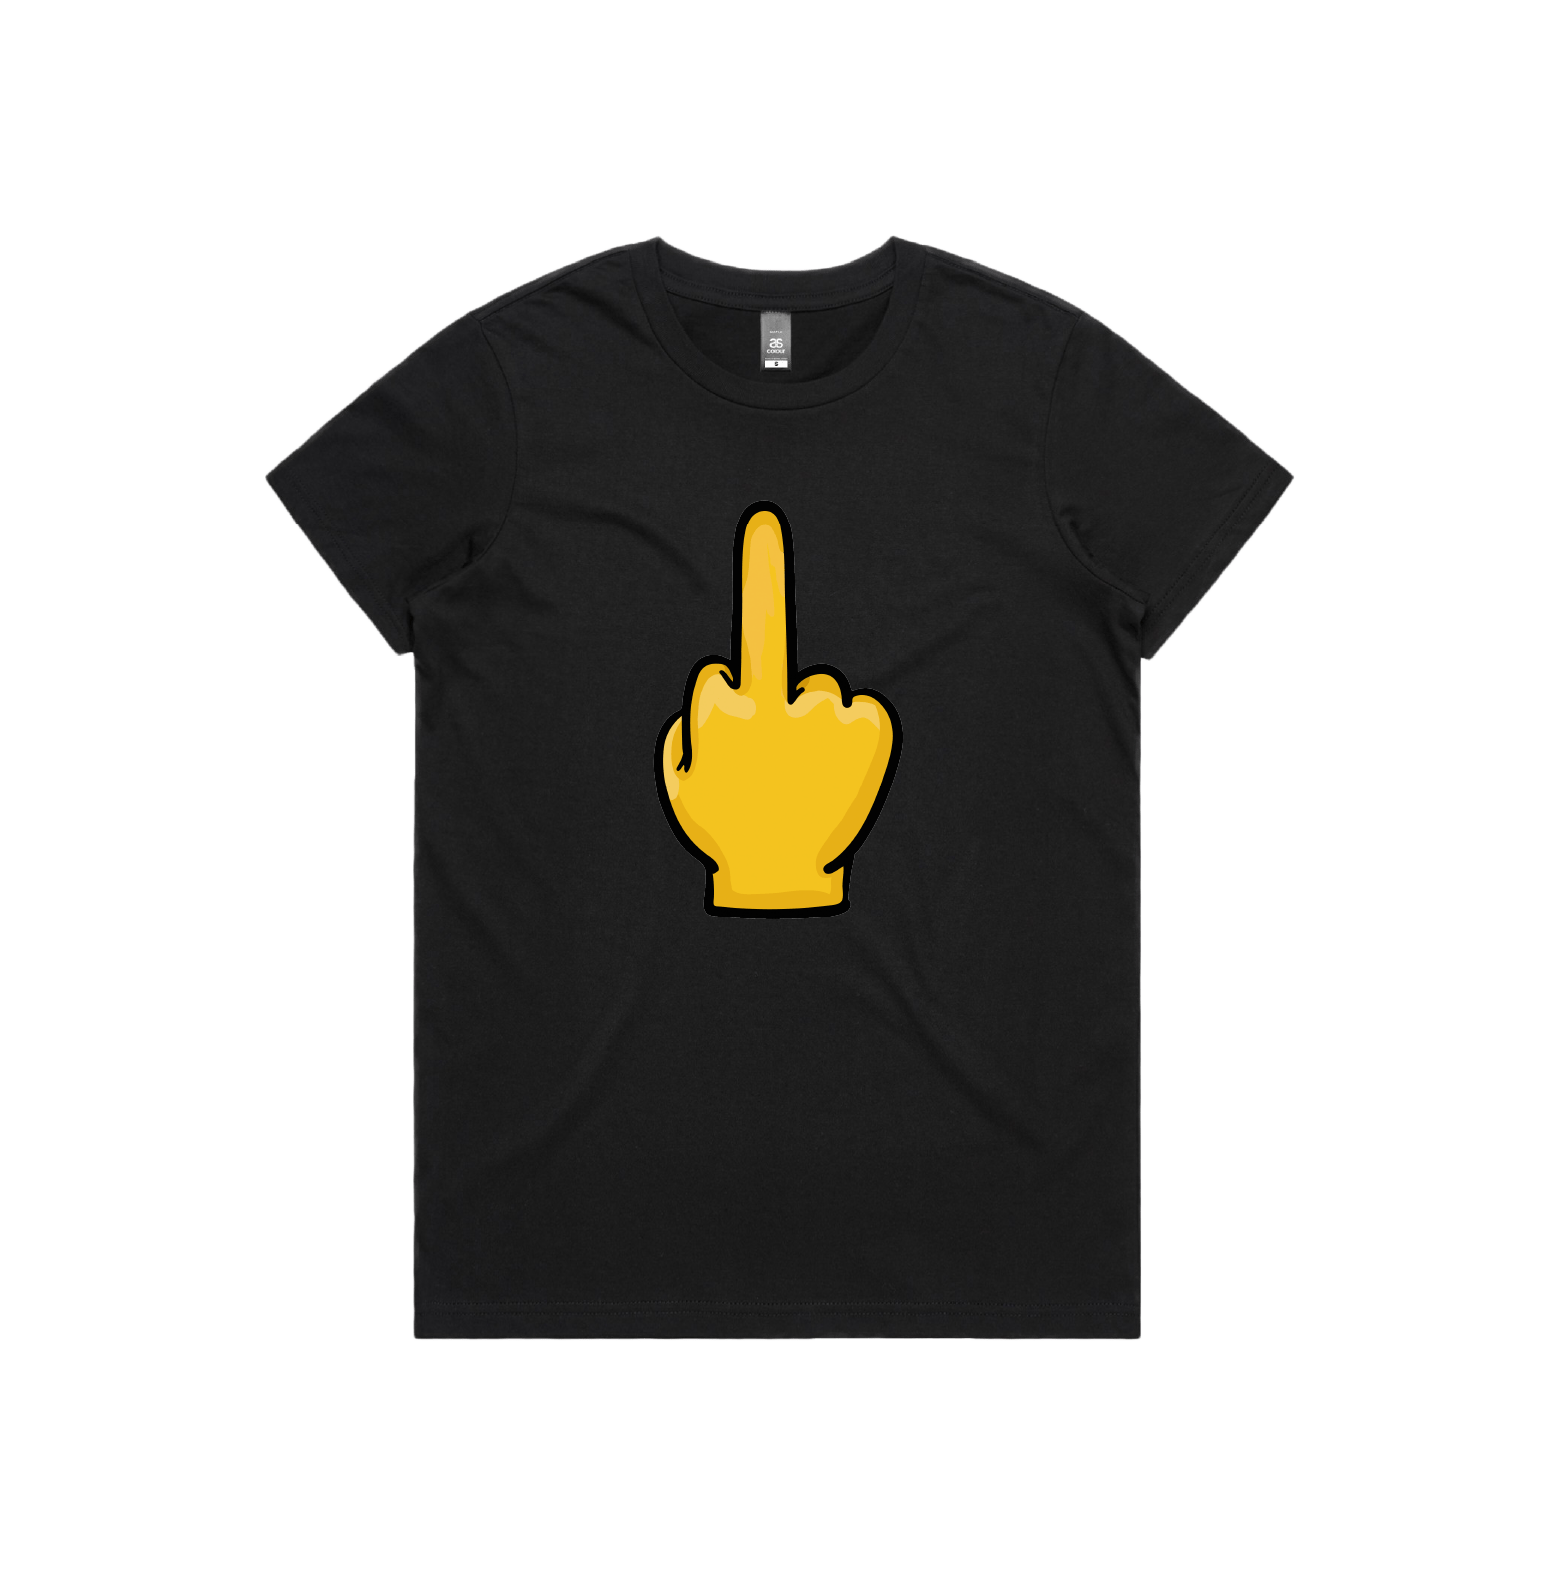 XS / Black / Large Front Design Up Yours 🖕 - Women's T Shirt